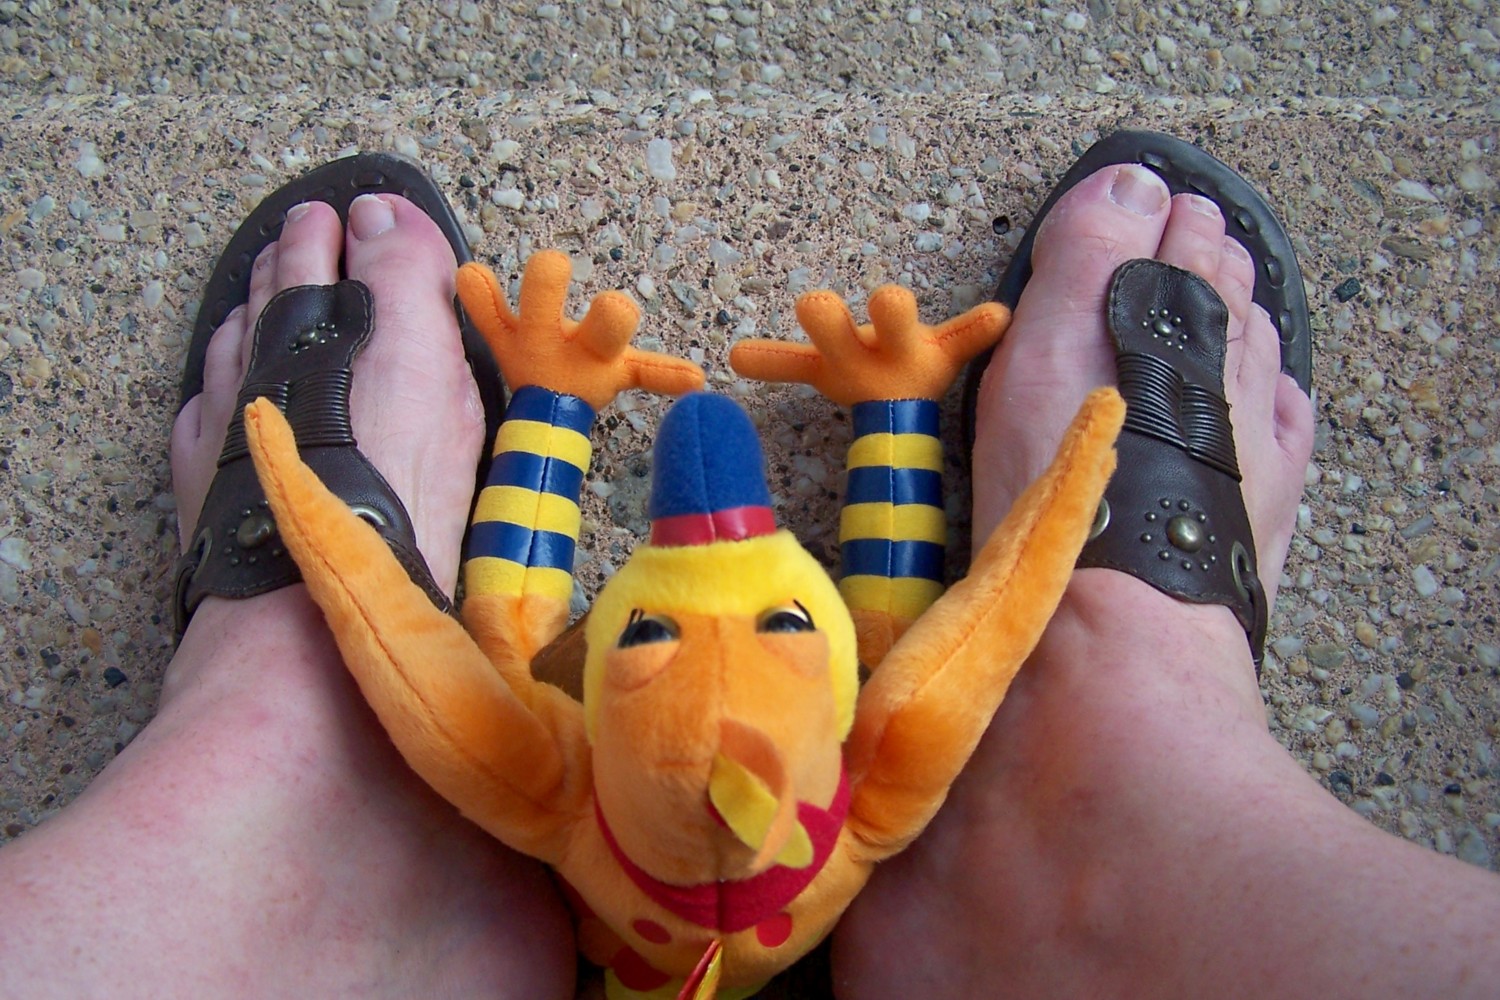 the legs and feet of someone wearing sandals